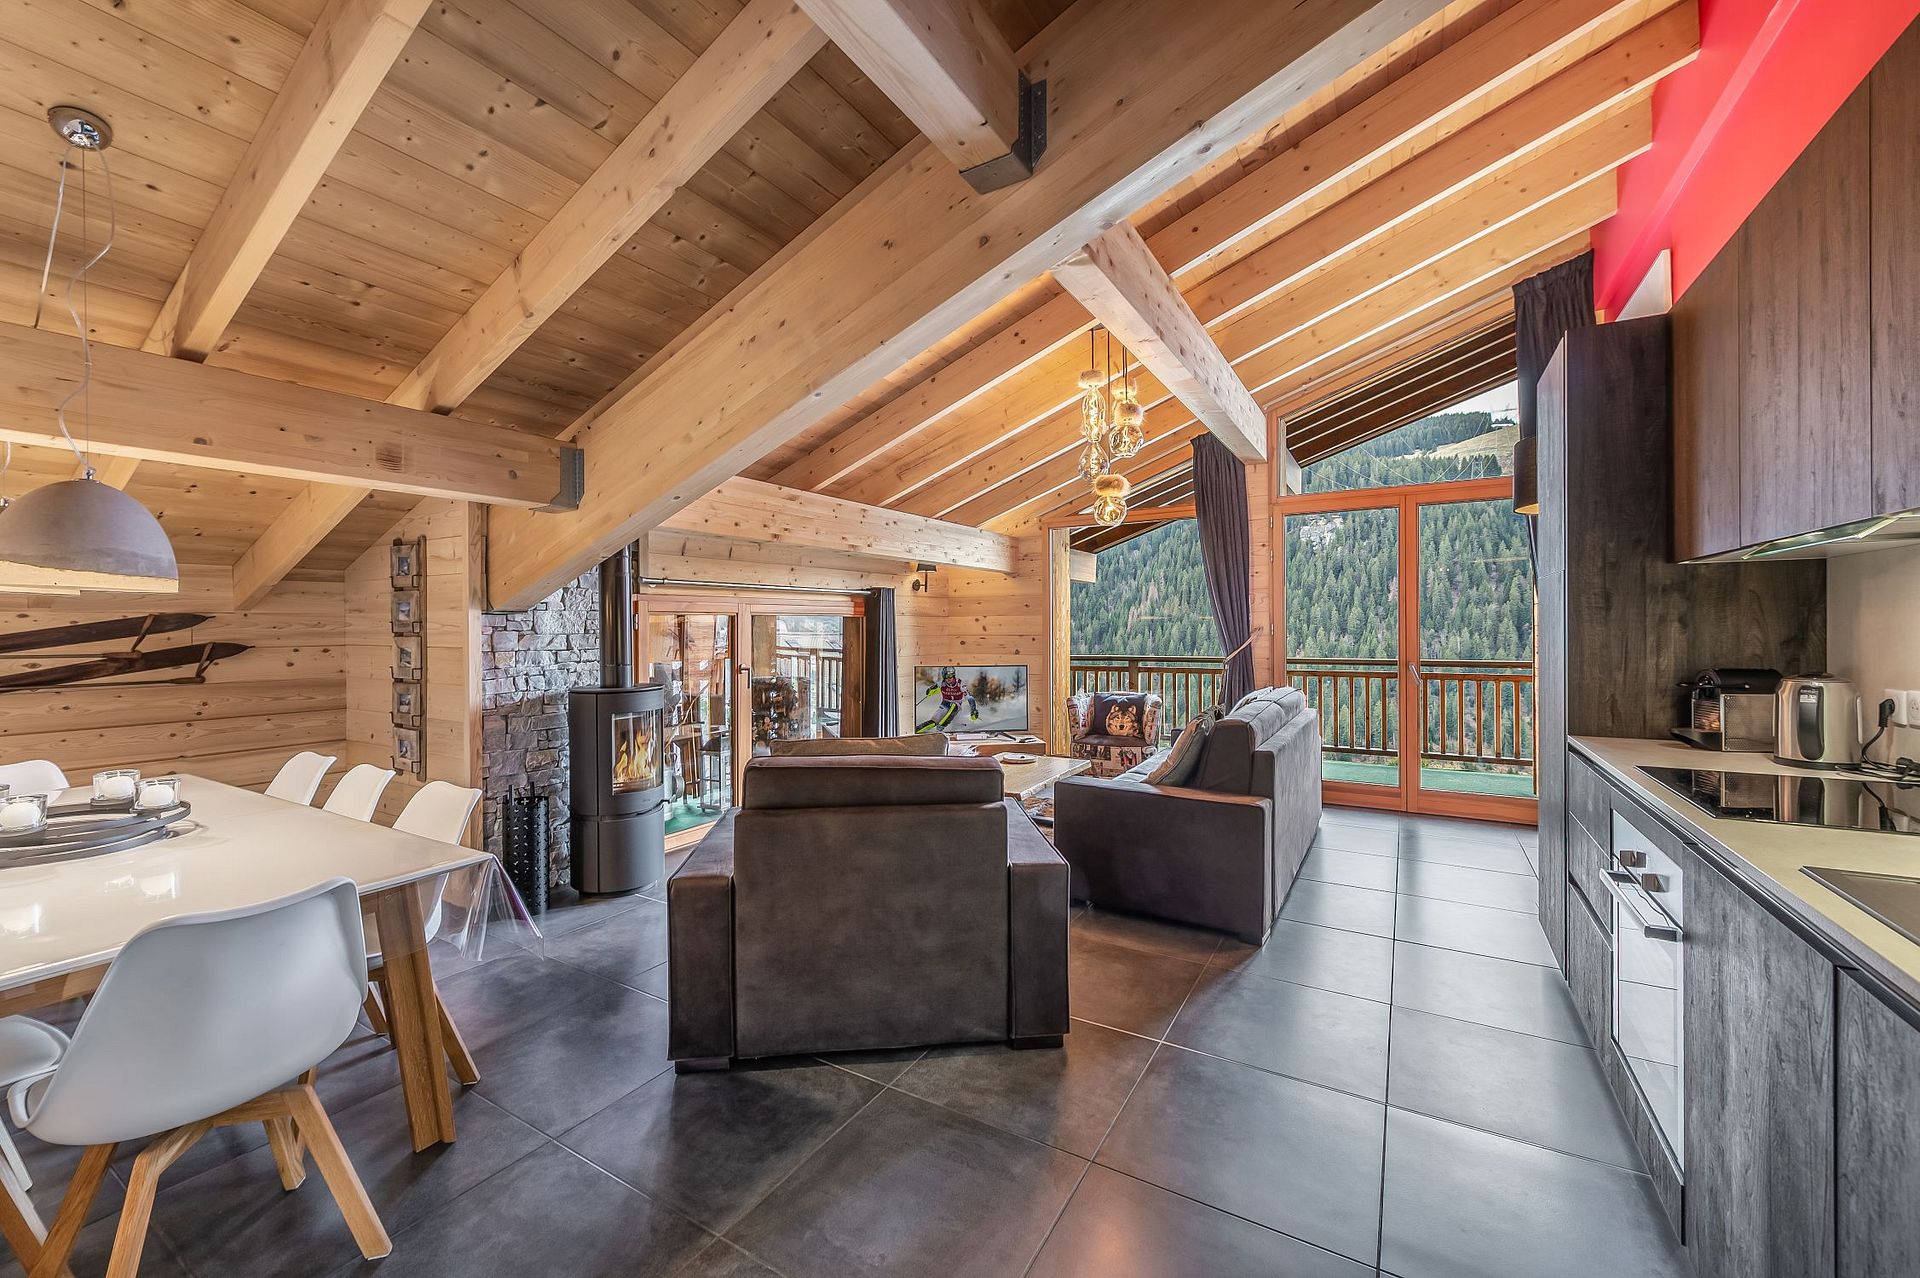 2 bed Penthouse For Sale in Portes du Soleil, French Alps